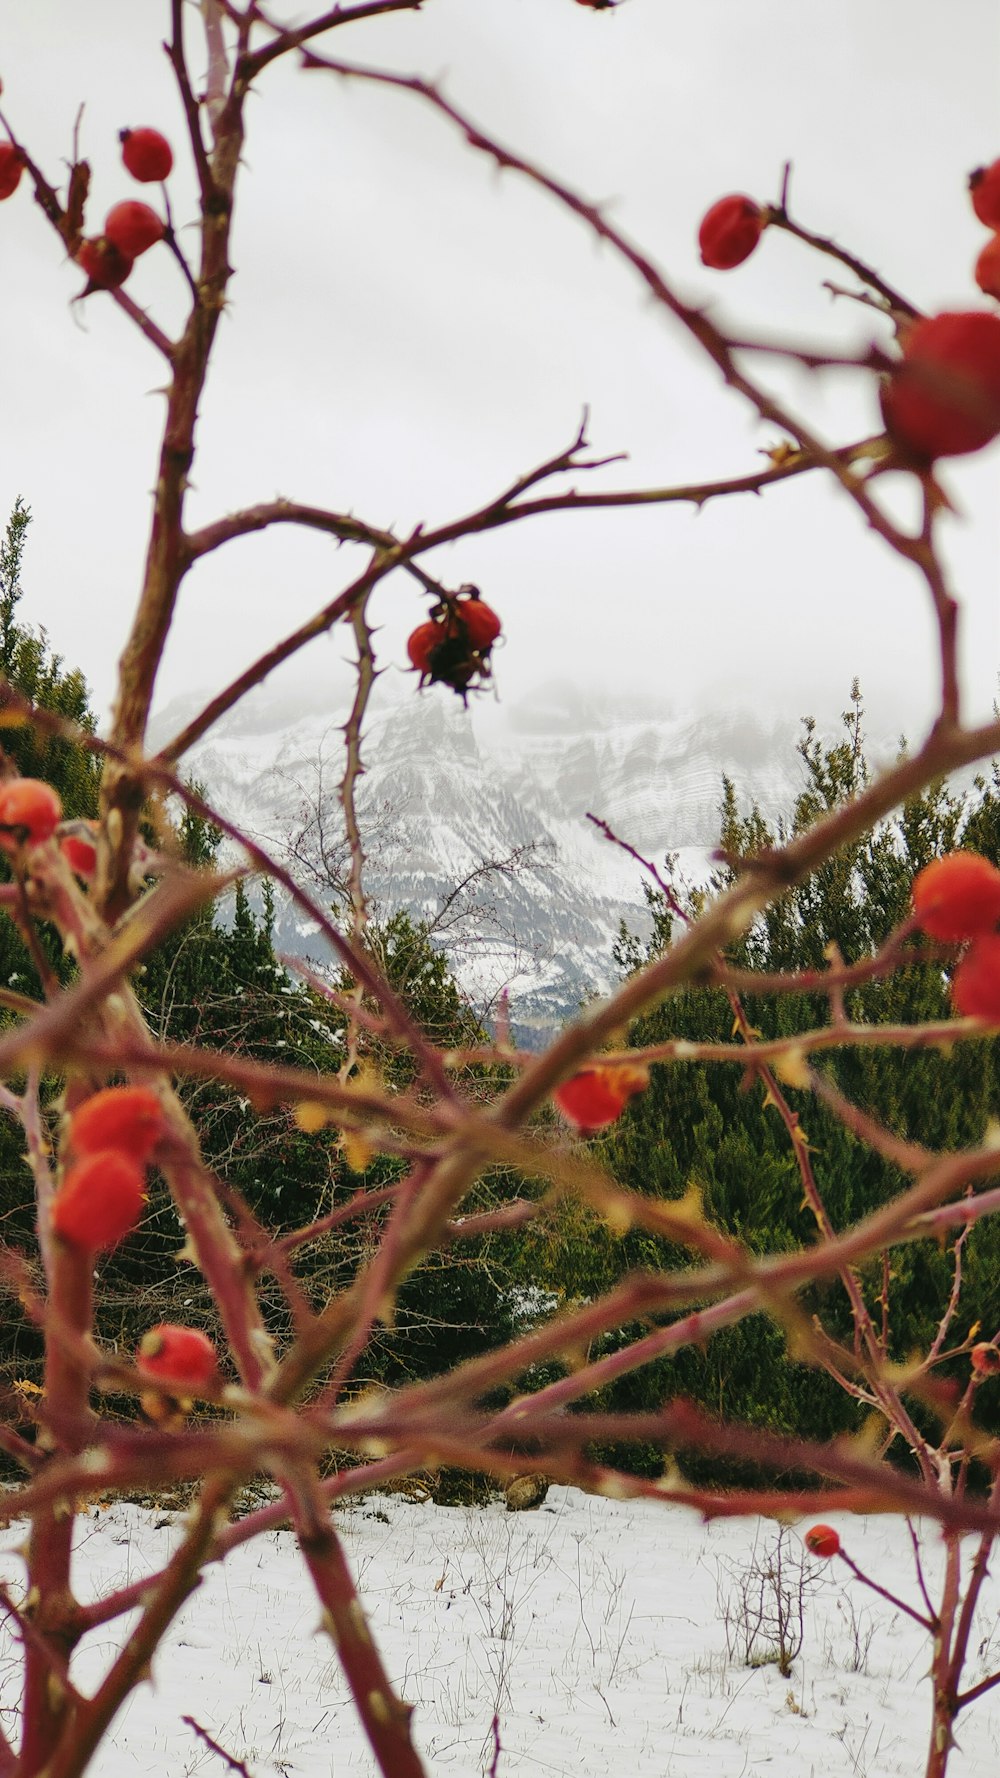 a tree with red berries in front of a snowy mountain